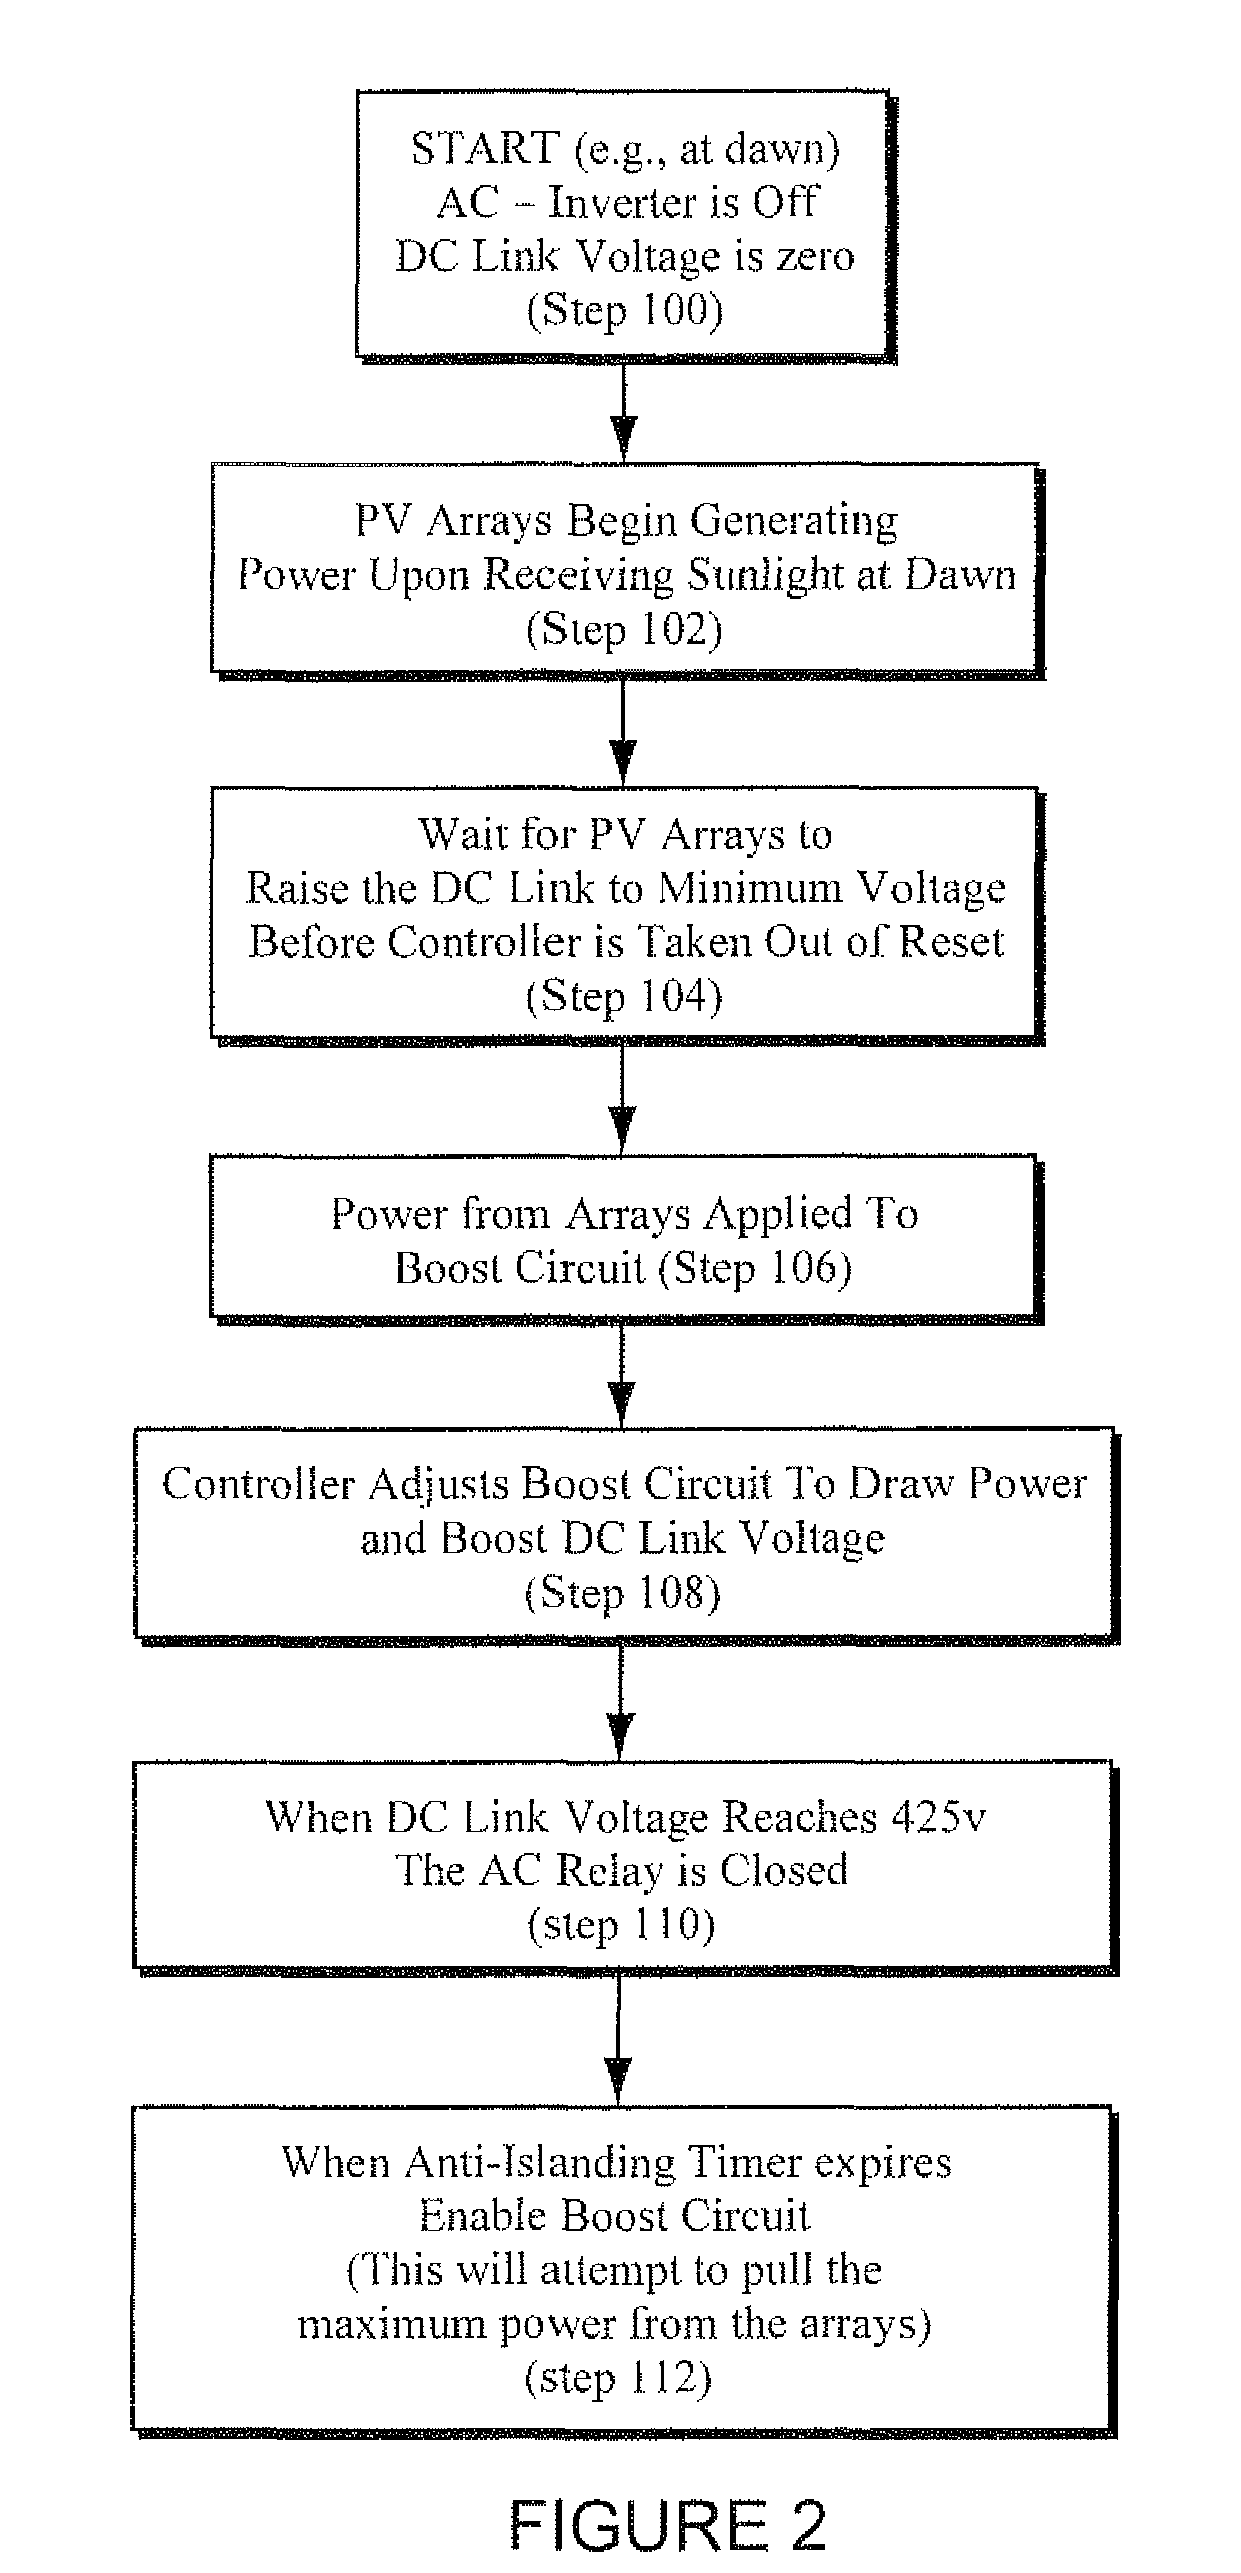 Method and system to convert direct current (DC) to alternating current (AC) using a photovoltaic inverter